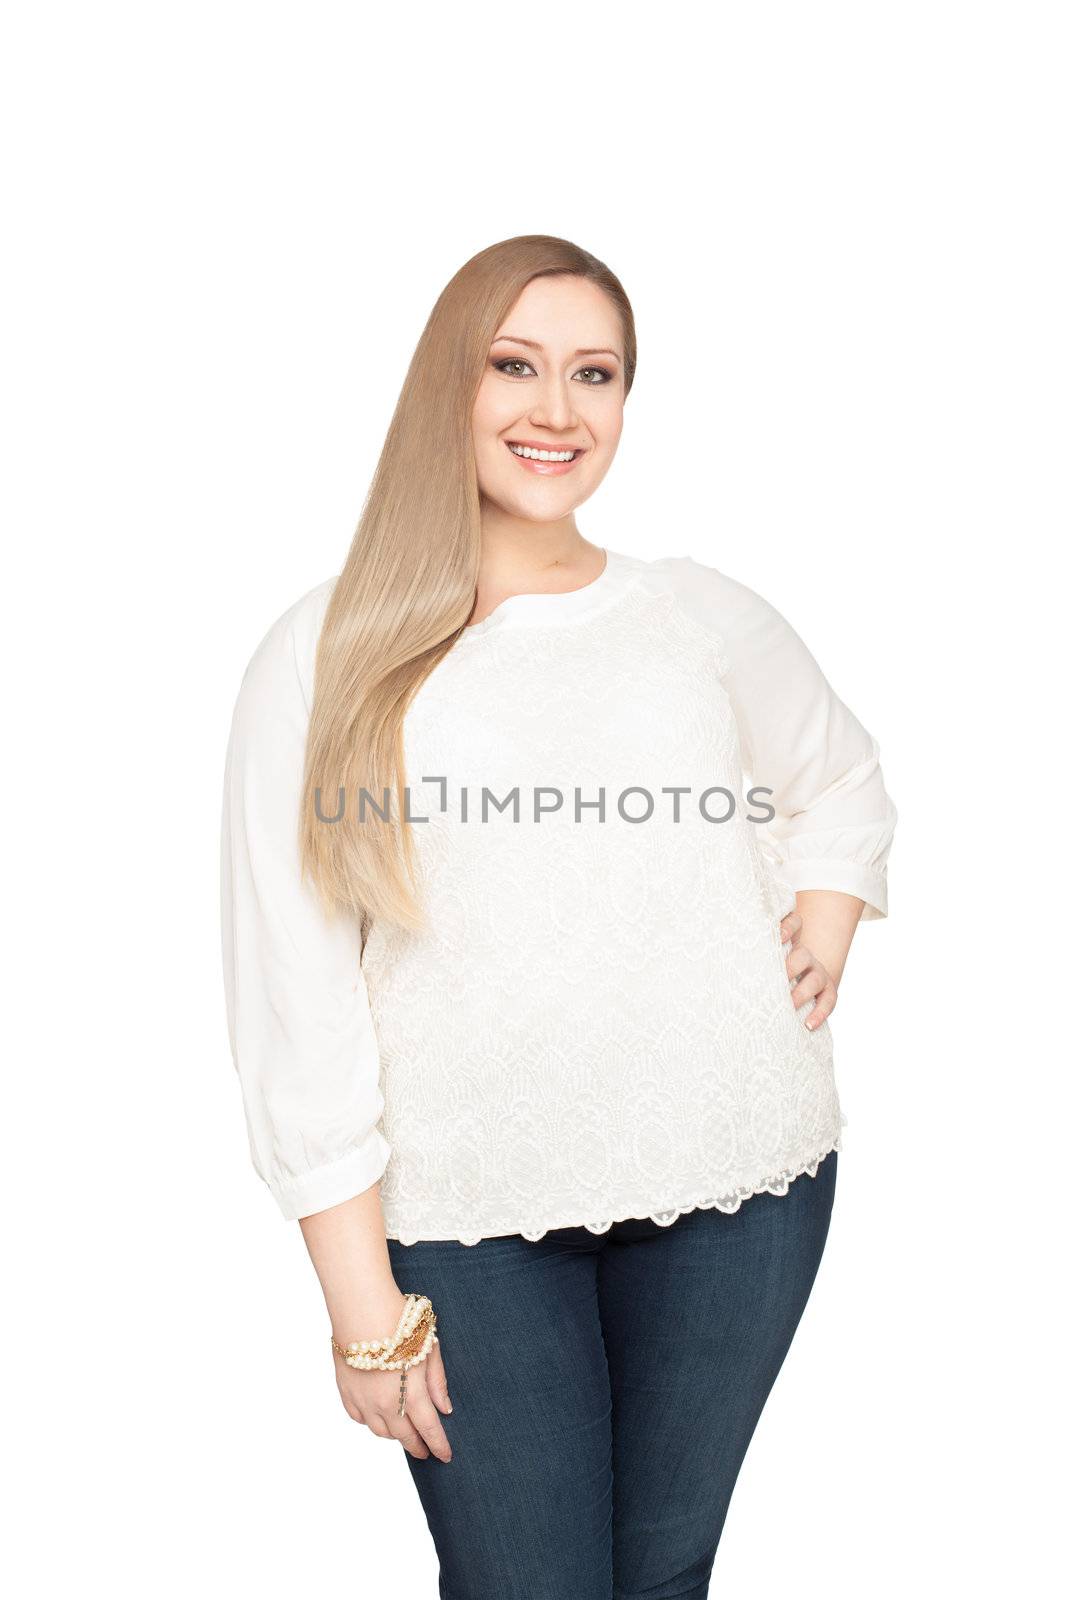 Overweight woman smiling positive by vilevi